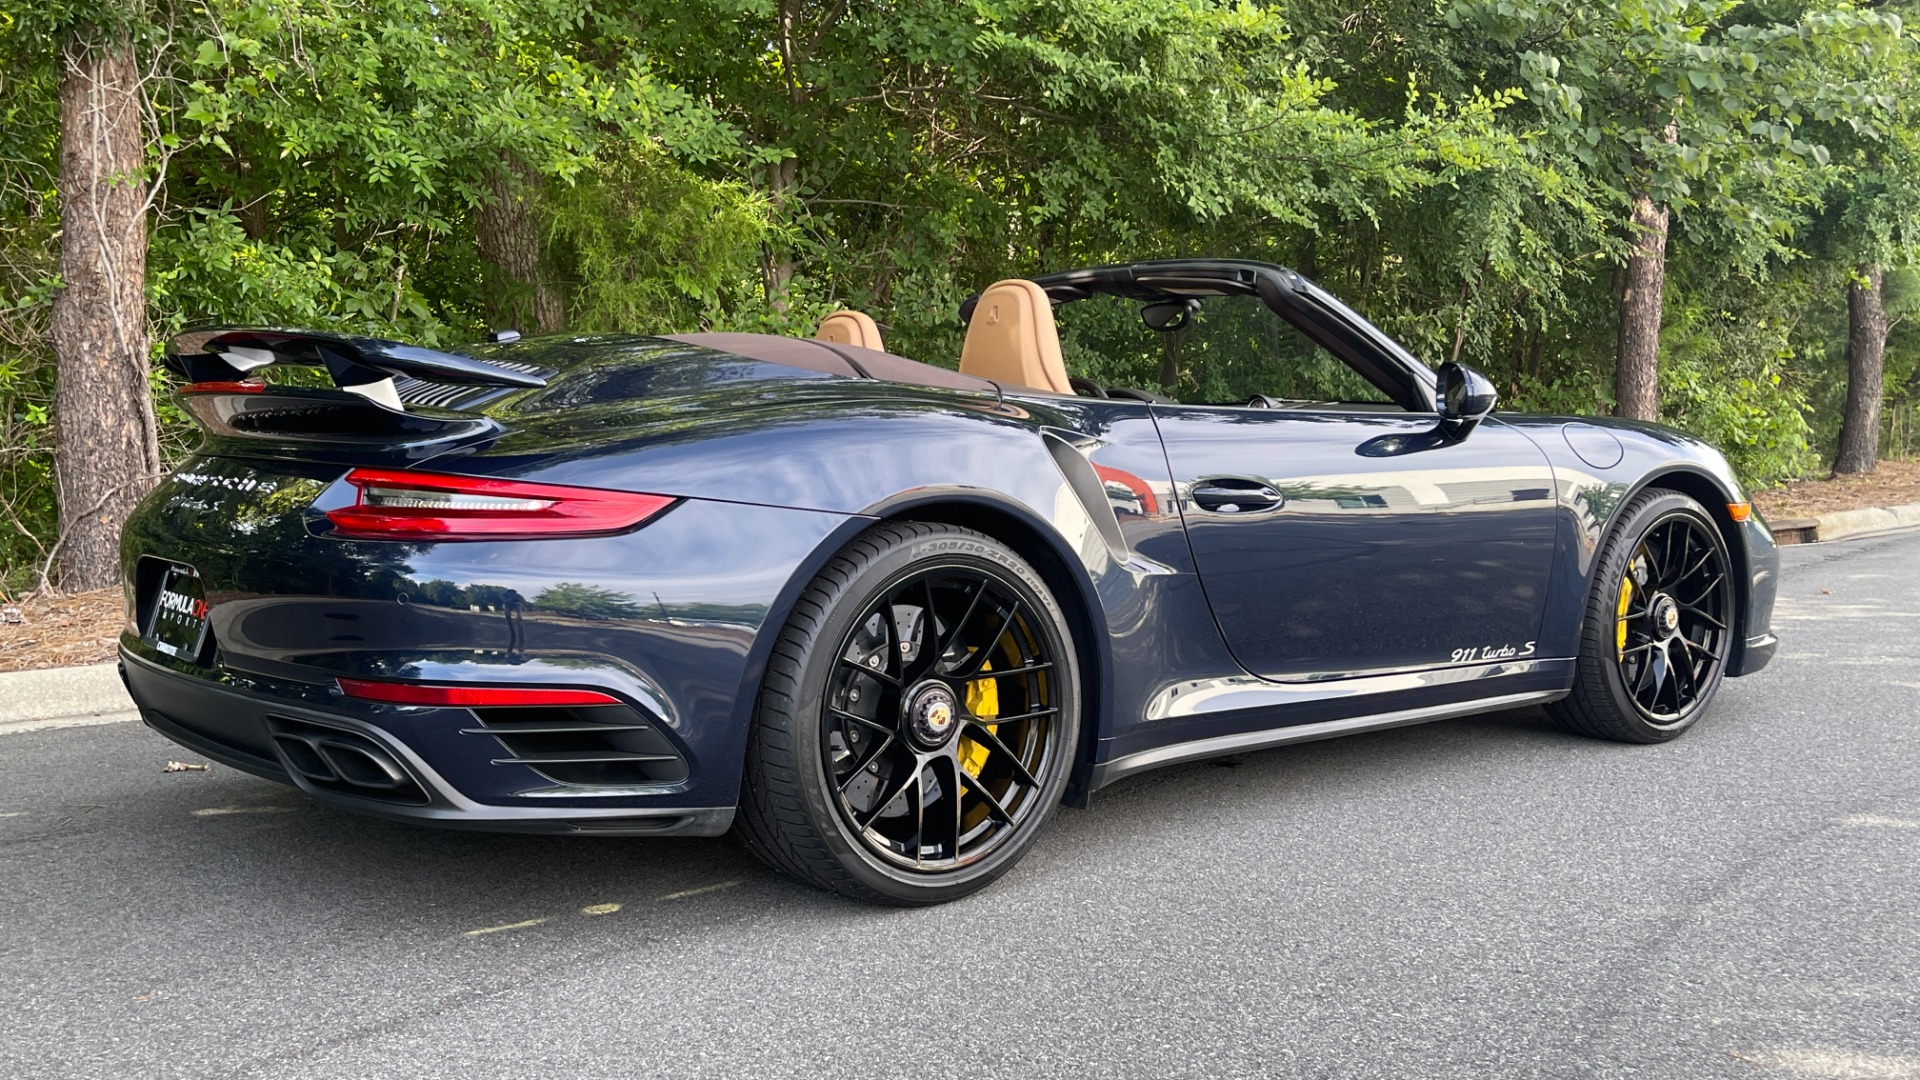 Used 2017 Porsche 911 Turbo S / CABRIOLET / FRONT LIFT / PDK / 20IN WHEELS for sale $179,999 at Formula Imports in Charlotte NC 28227 31